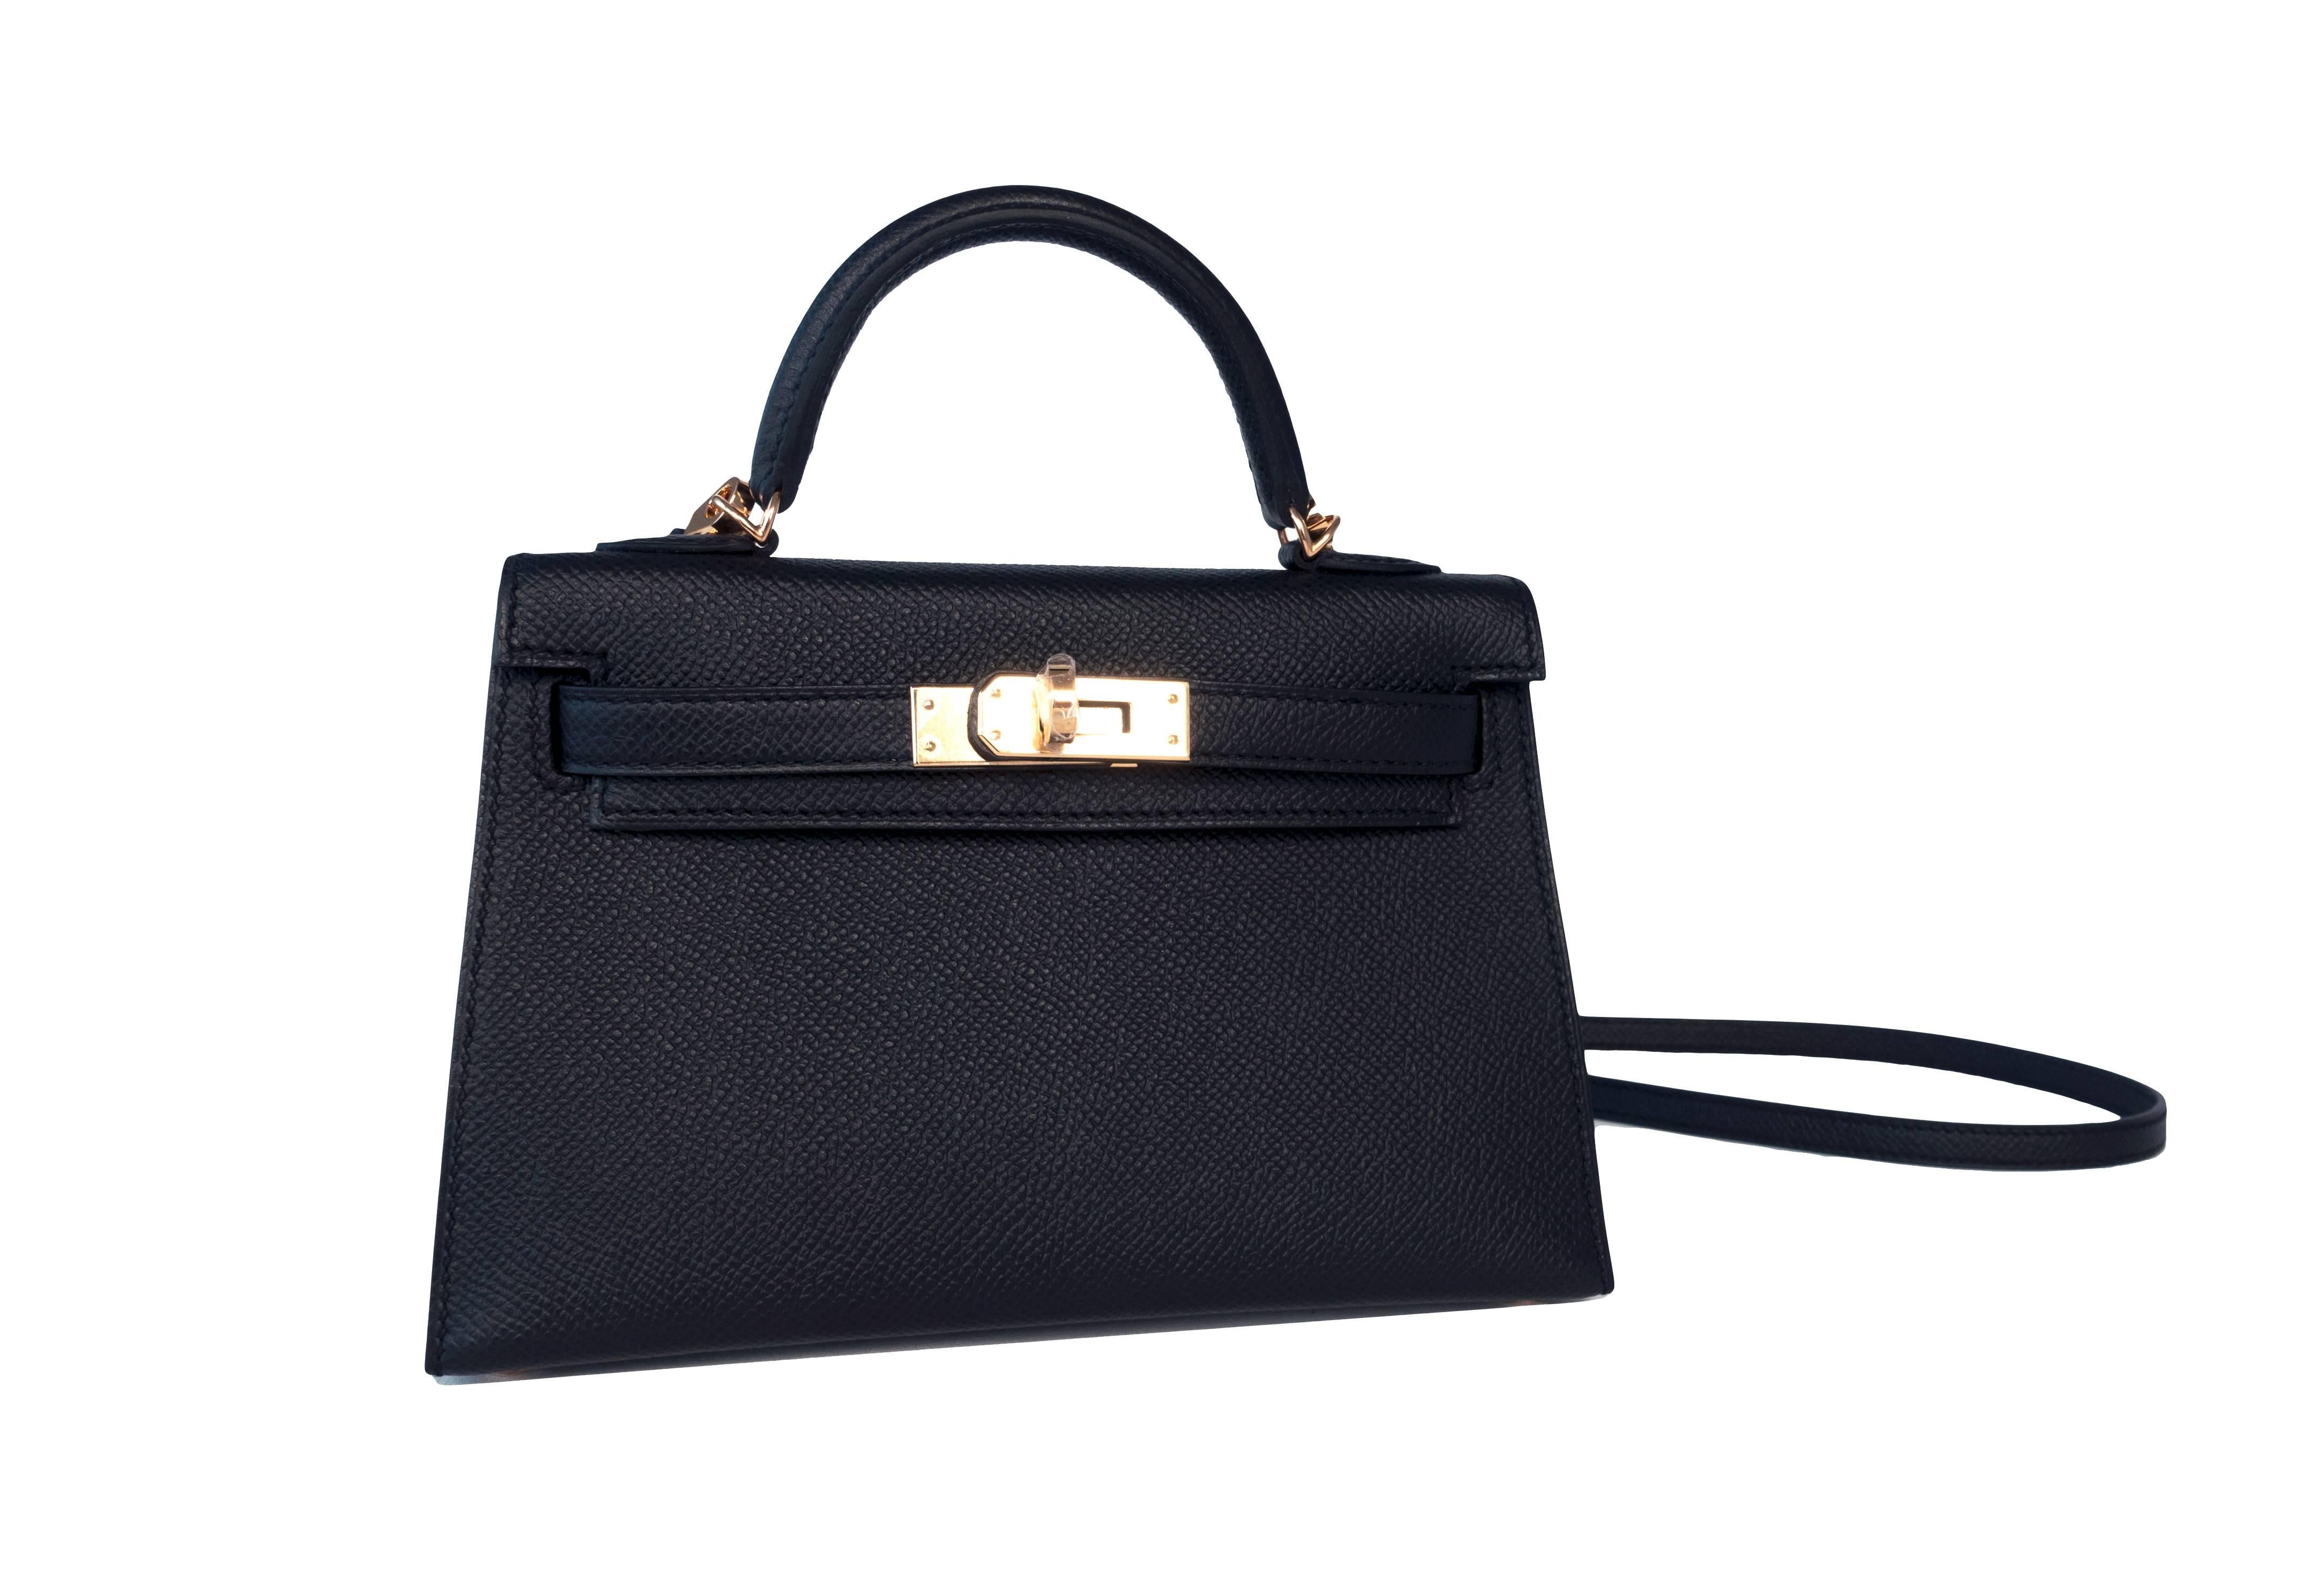 Limited Edition VIP Hermes 20cm Black Epsom Kelly Gold Hardware 
Store Fresh. Pristine Condition (with plastic on hardware)
Just purchased from Hermes store in 2016. 
Perfect gift! Comes full set with shoulder strap, sleeper for the bag, Hermes